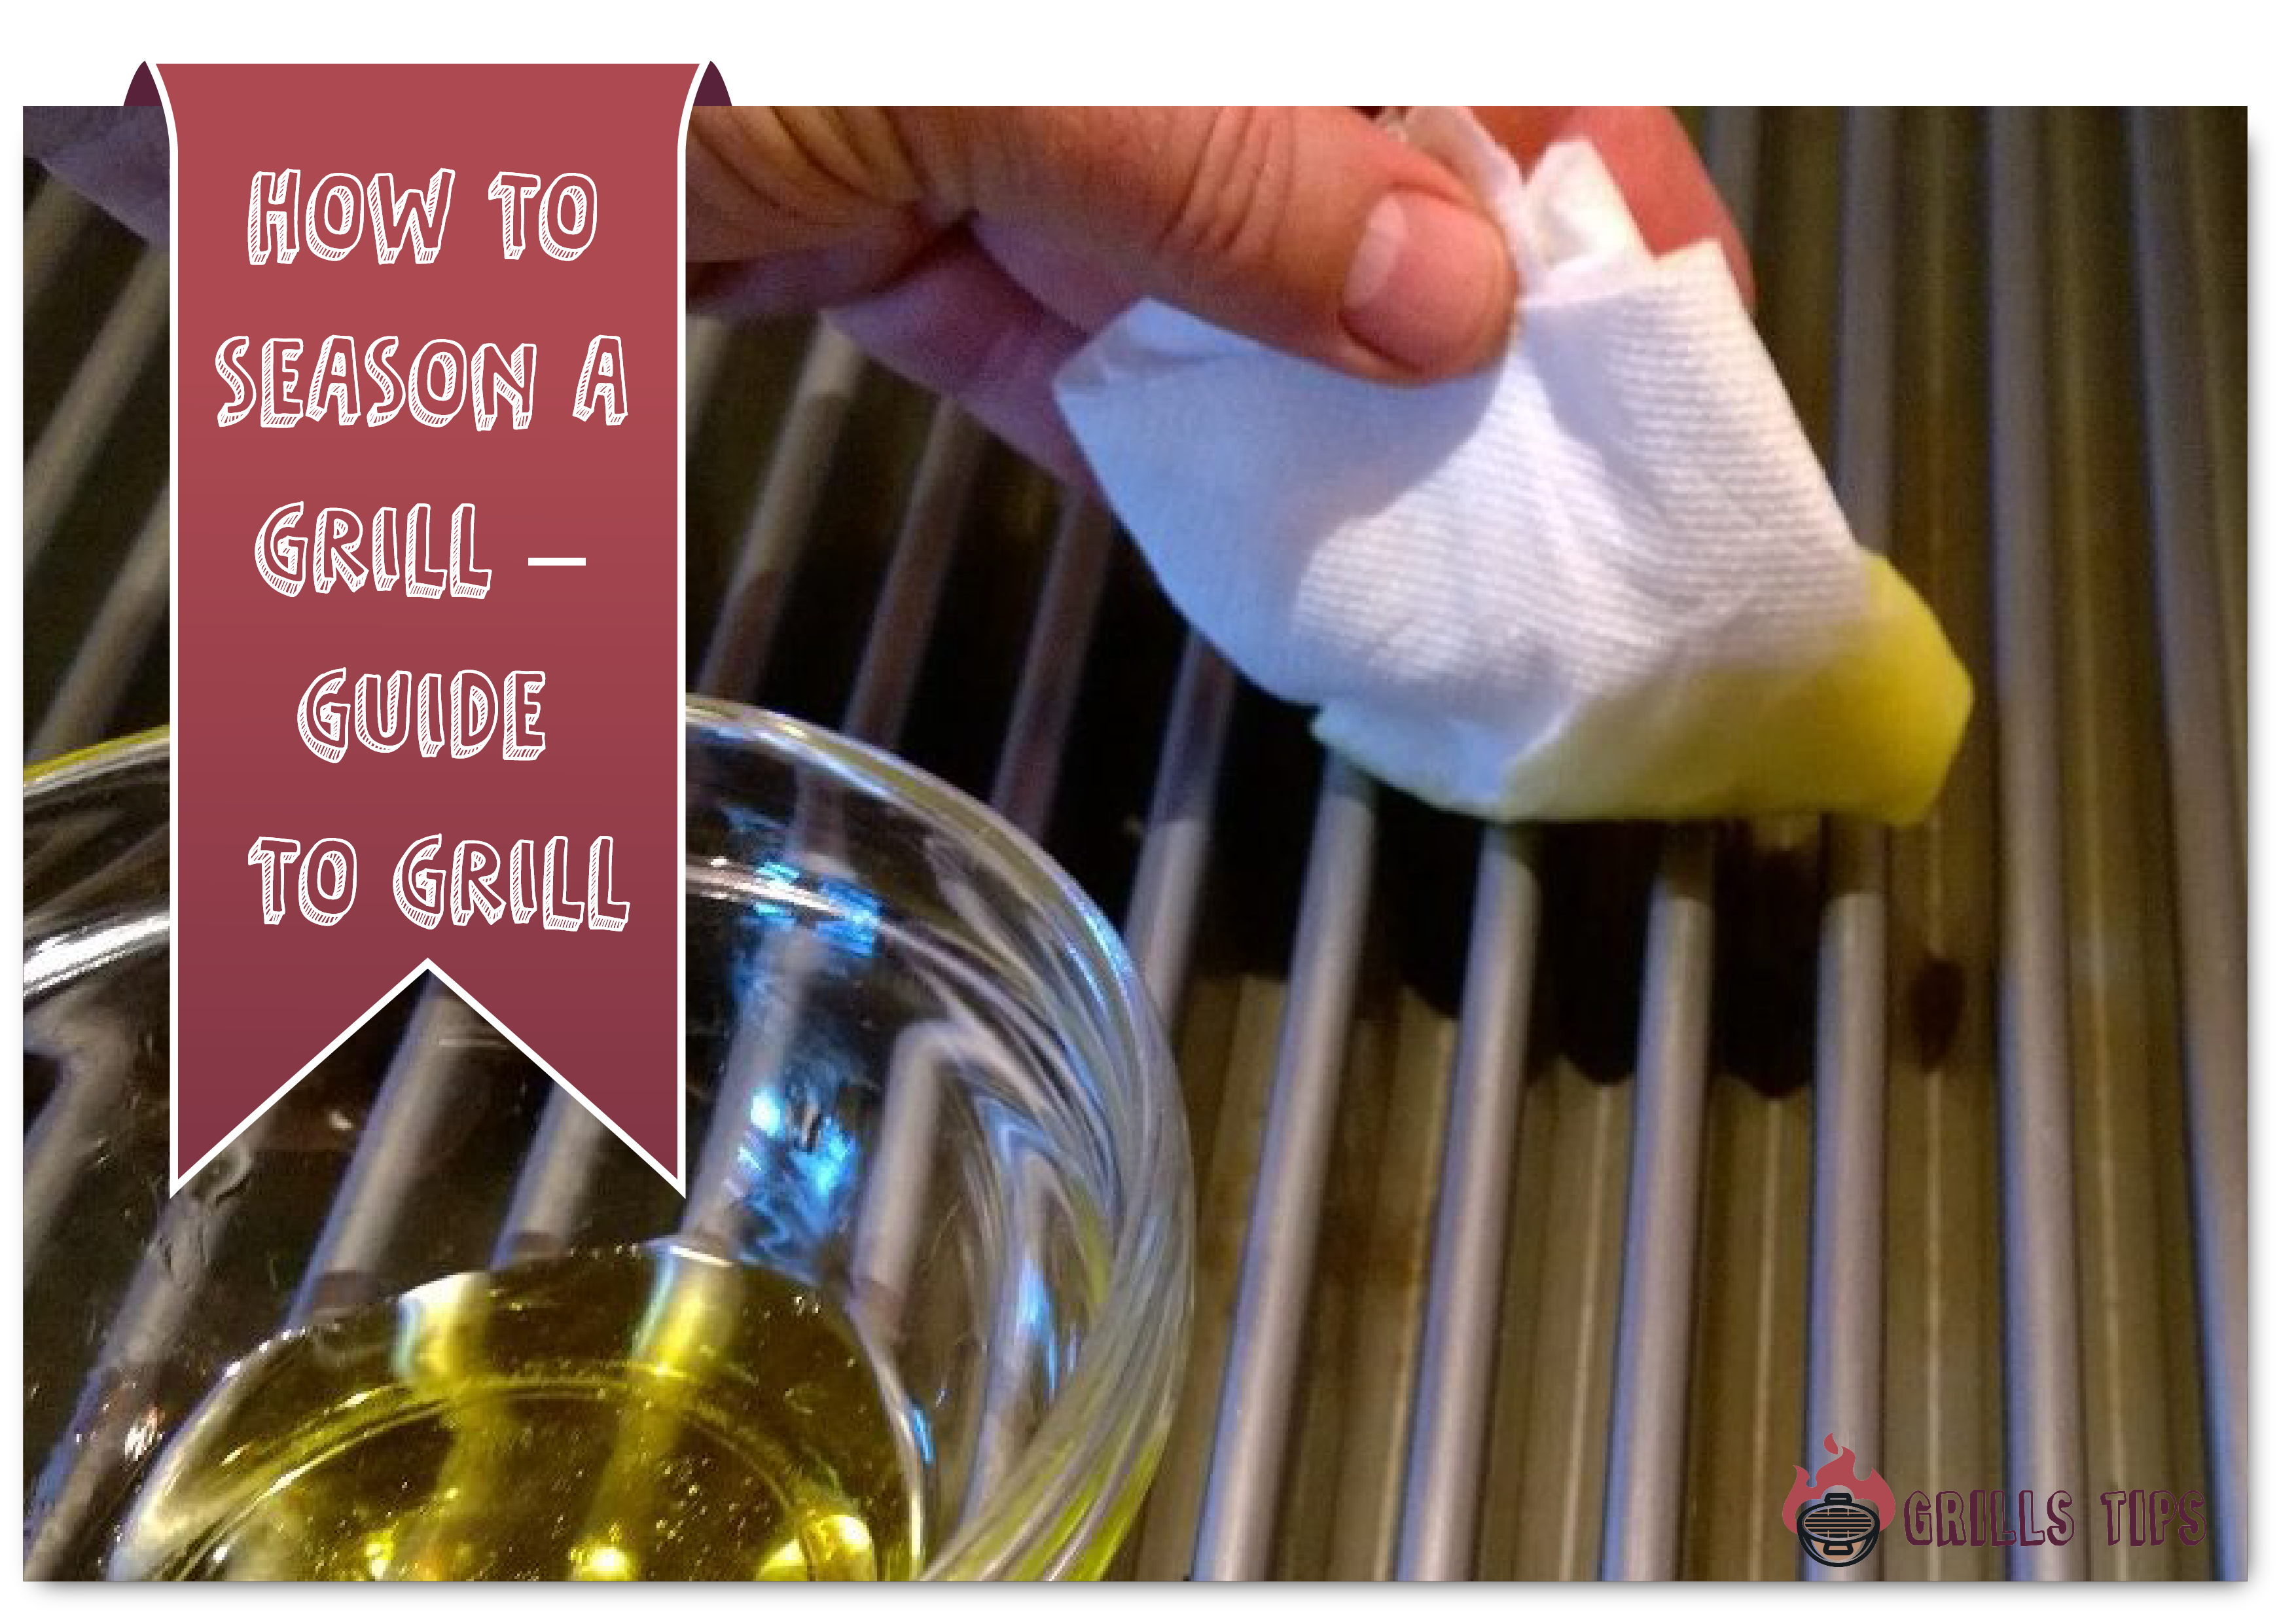  How To Season A Grill – Guide To Grill